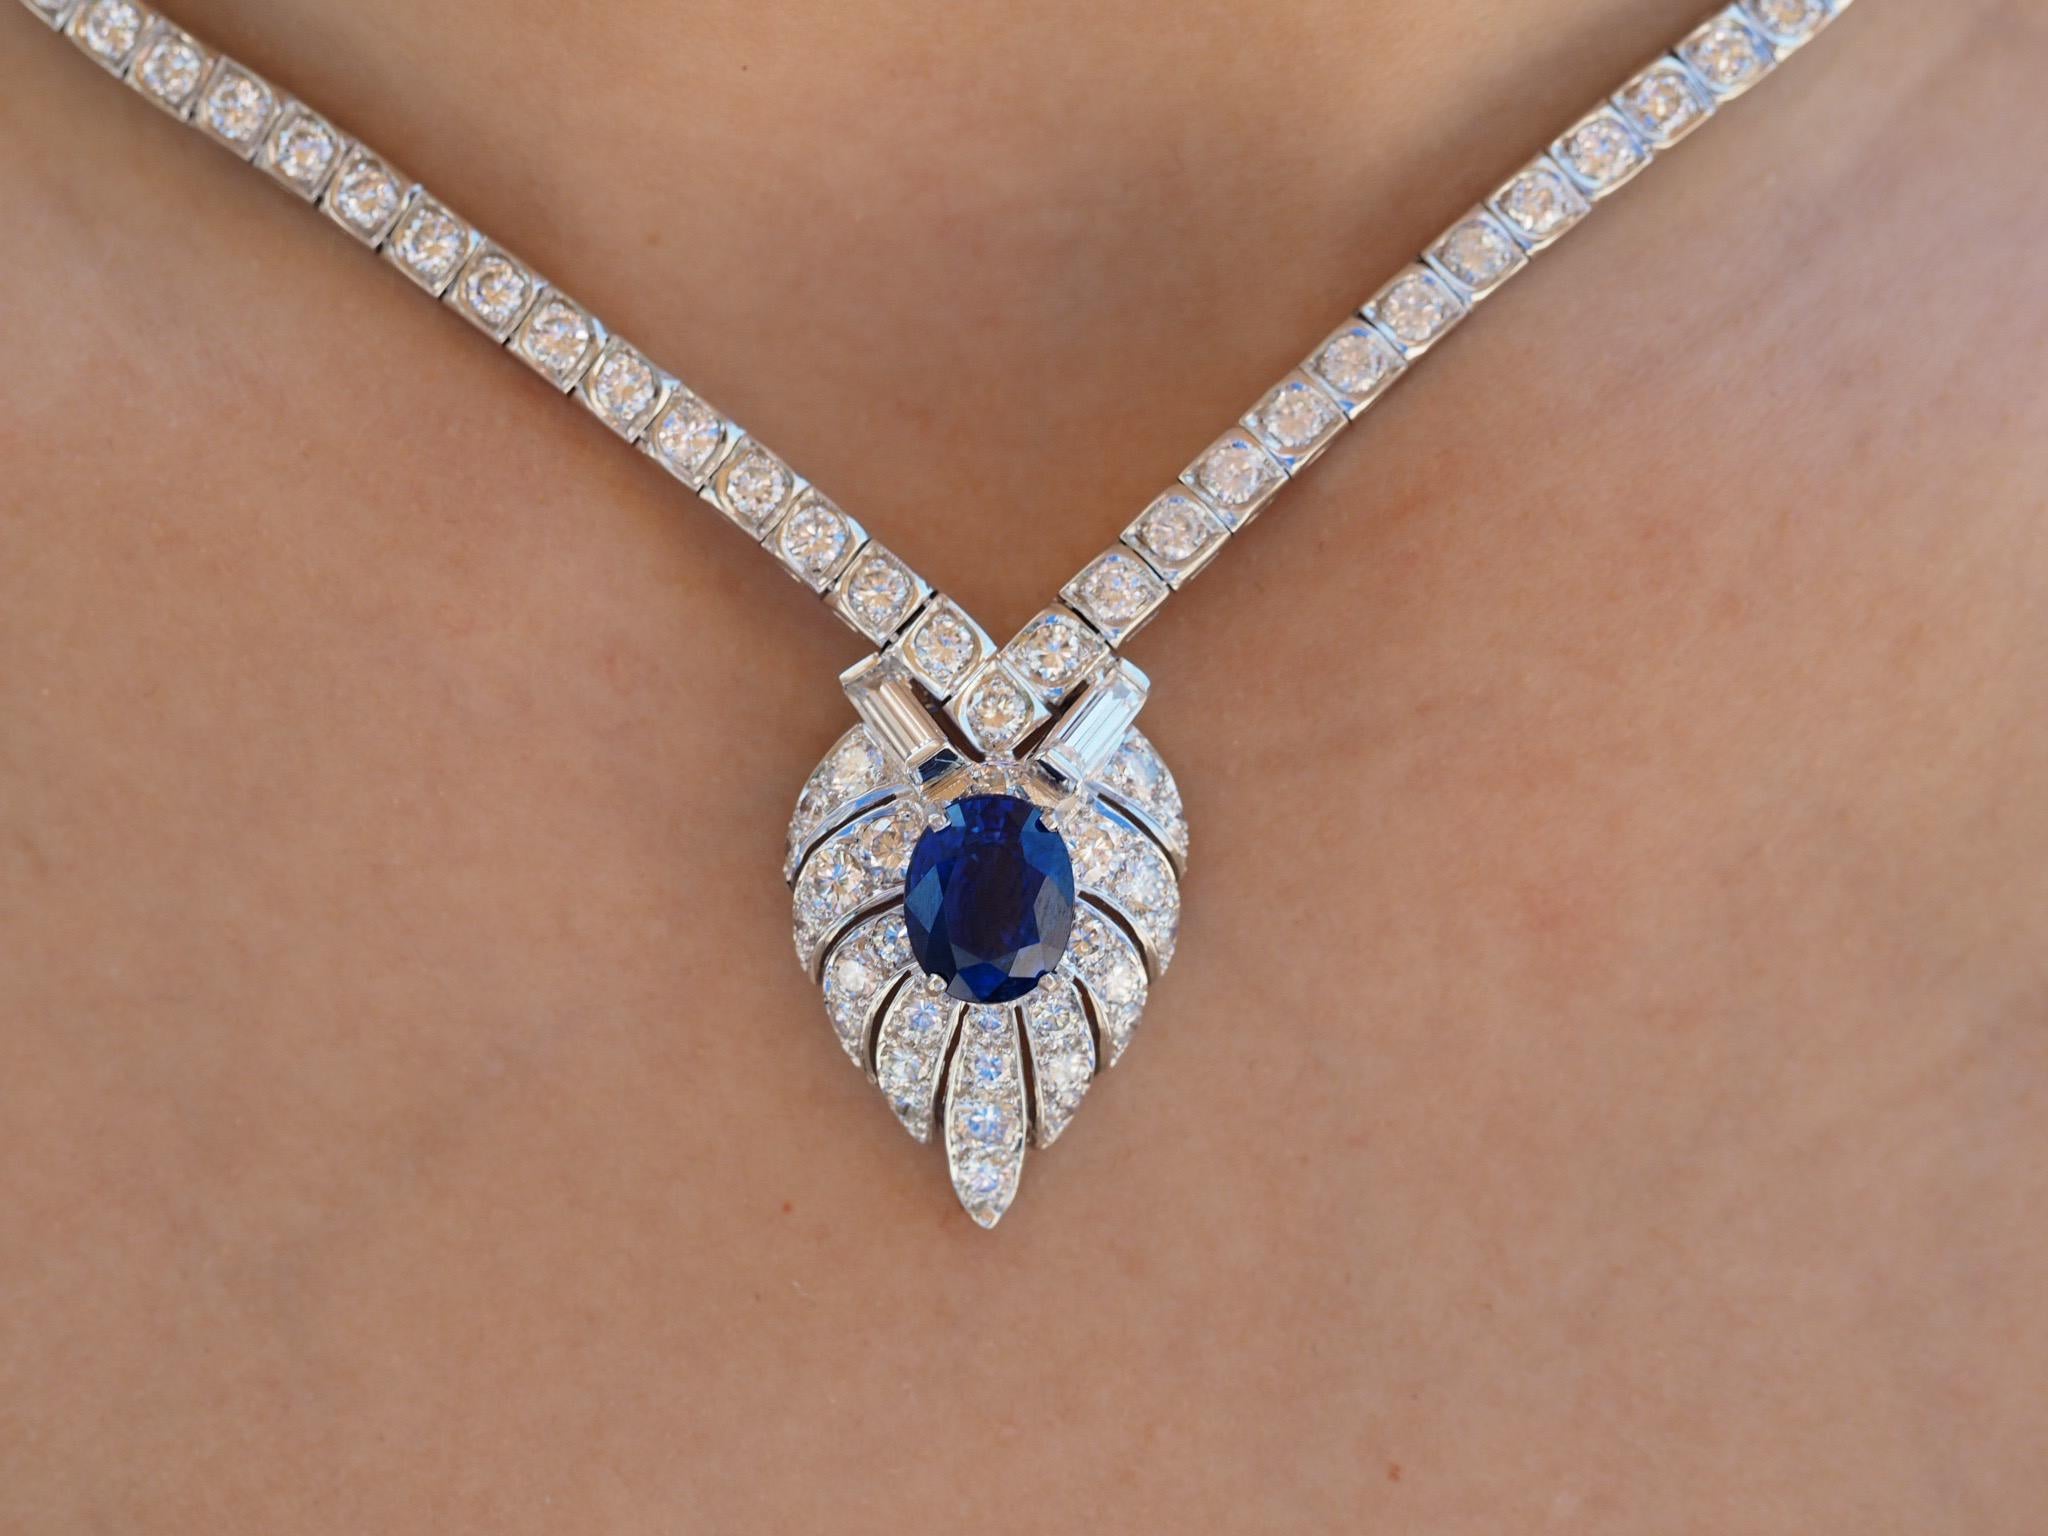 This exquisite blue sapphire and diamond necklace is sure to make you feel like royalty. A royal blue natural GIA sapphire is set in the center held by four prongs flooded with diamonds all around. The pendant itself consist of two large baguettes